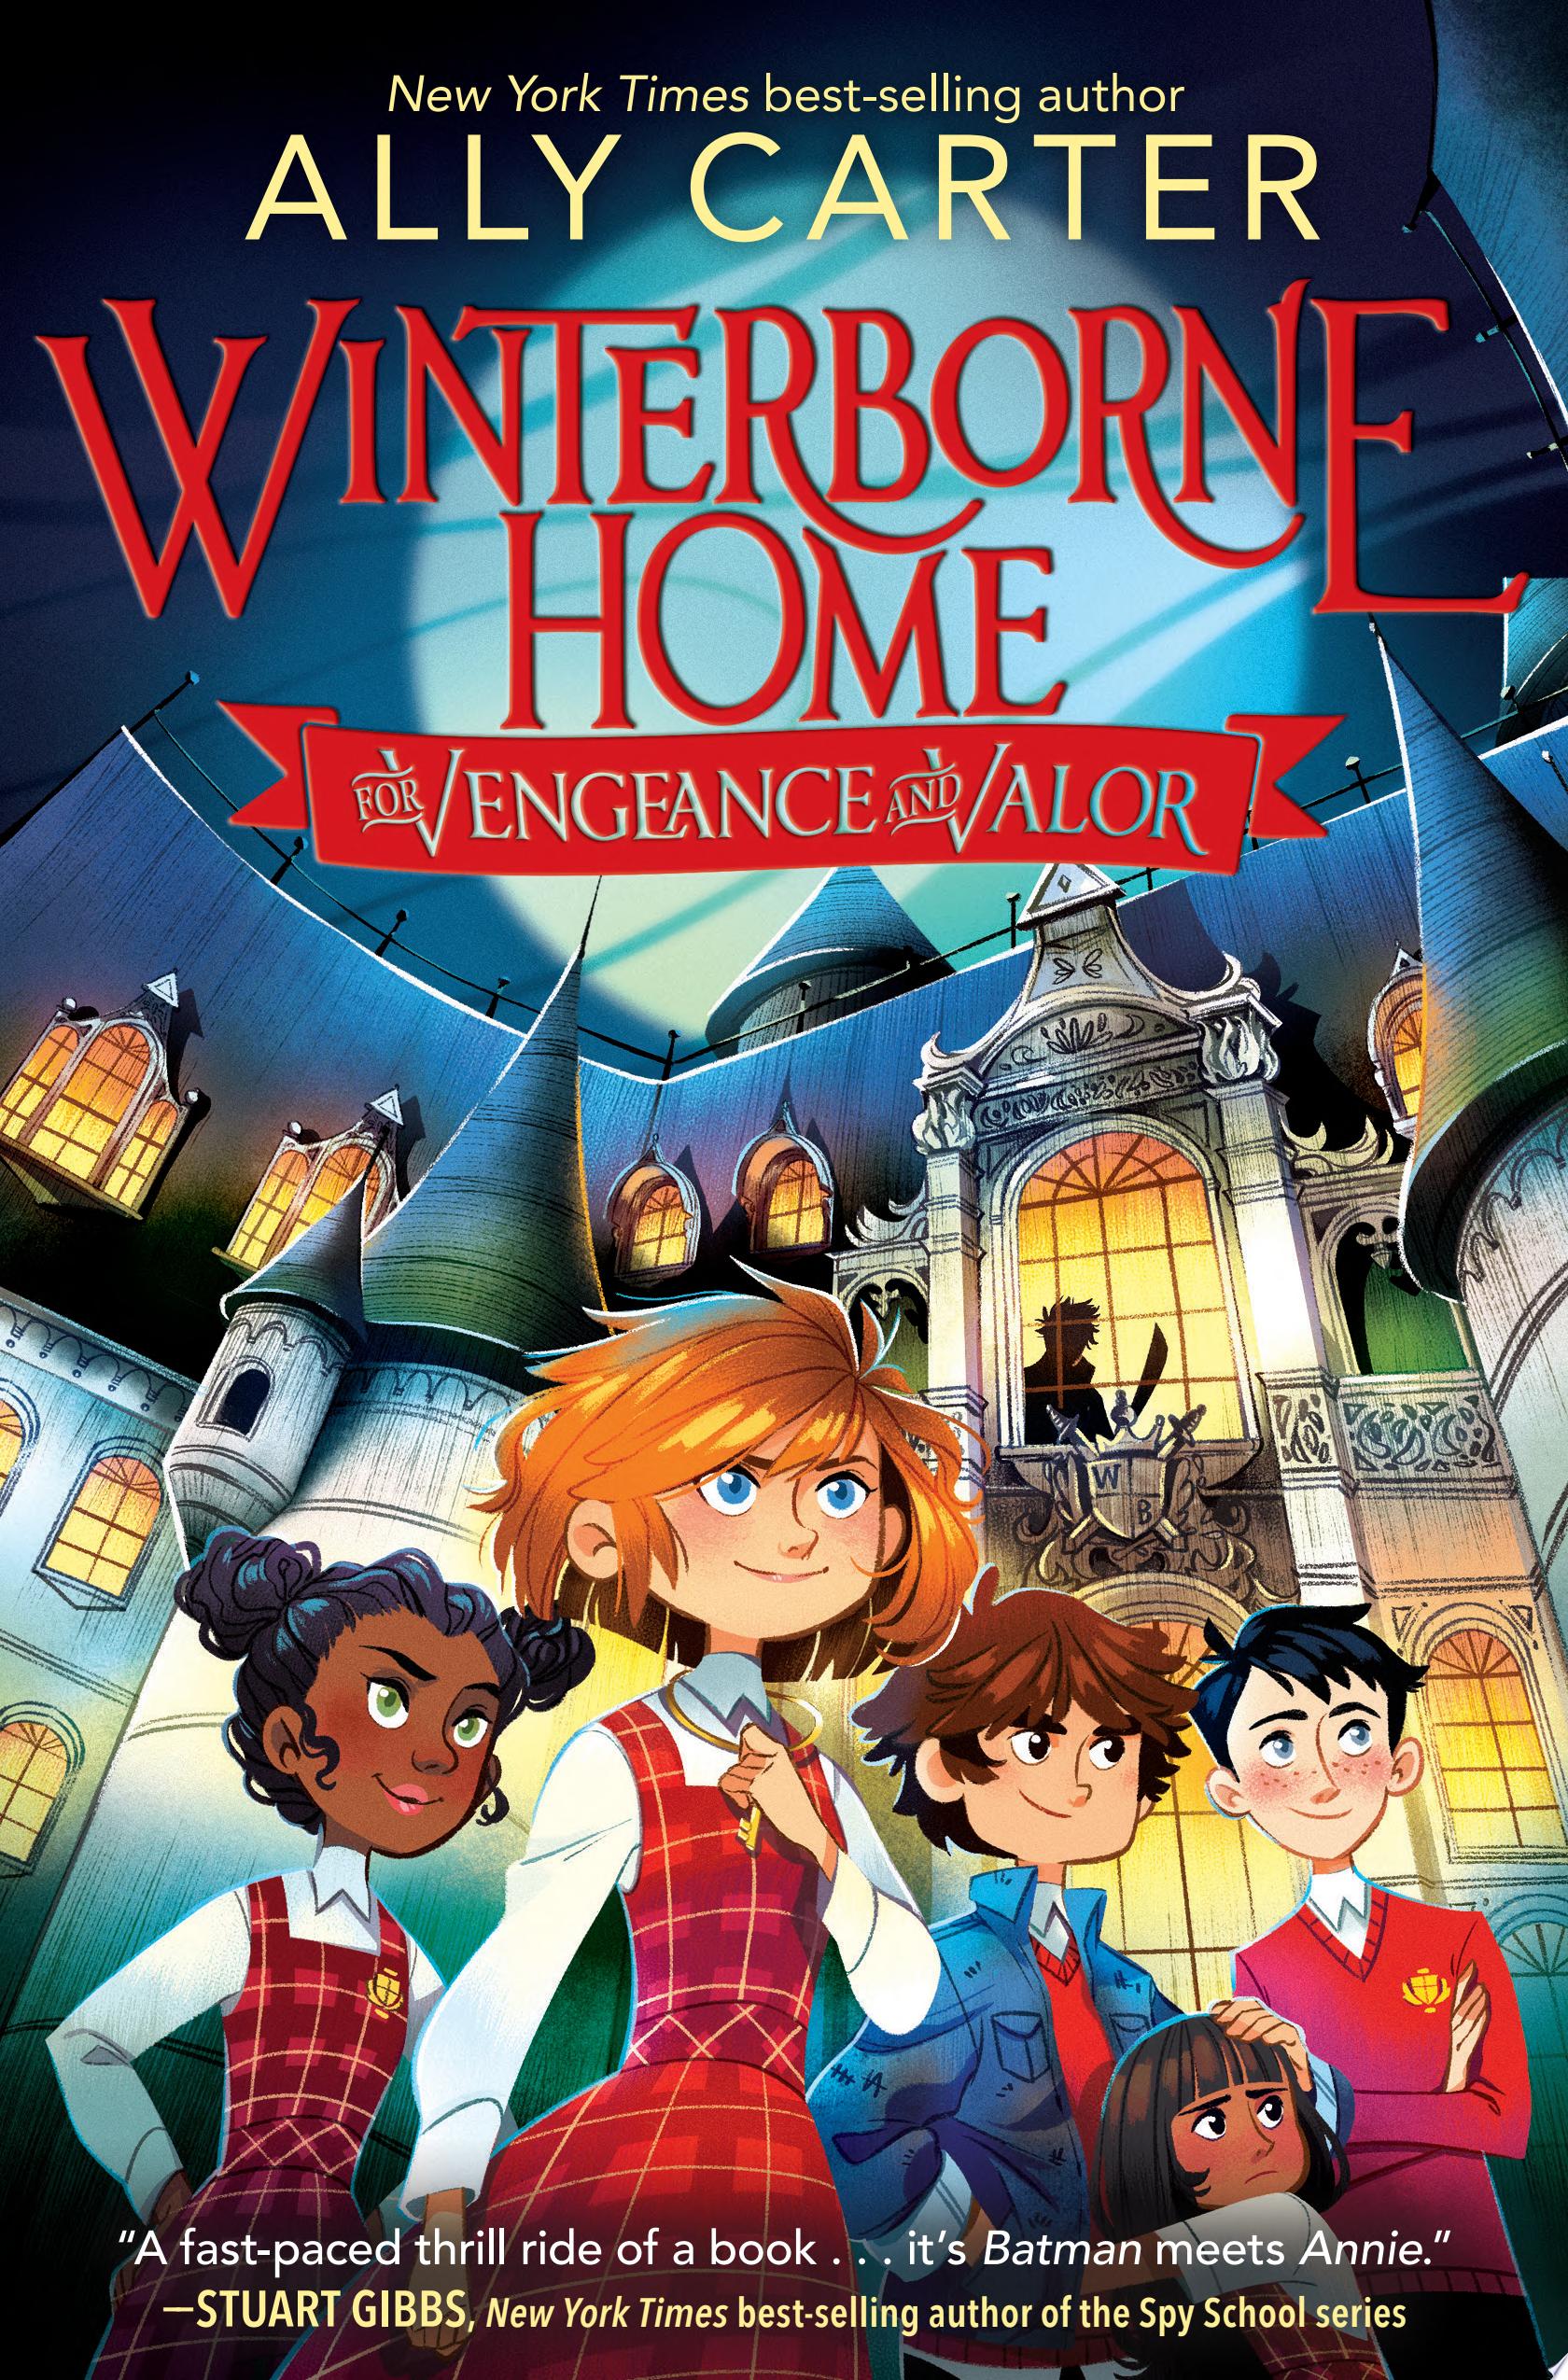 Image for "Winterborne Home for Vengeance and Valor"